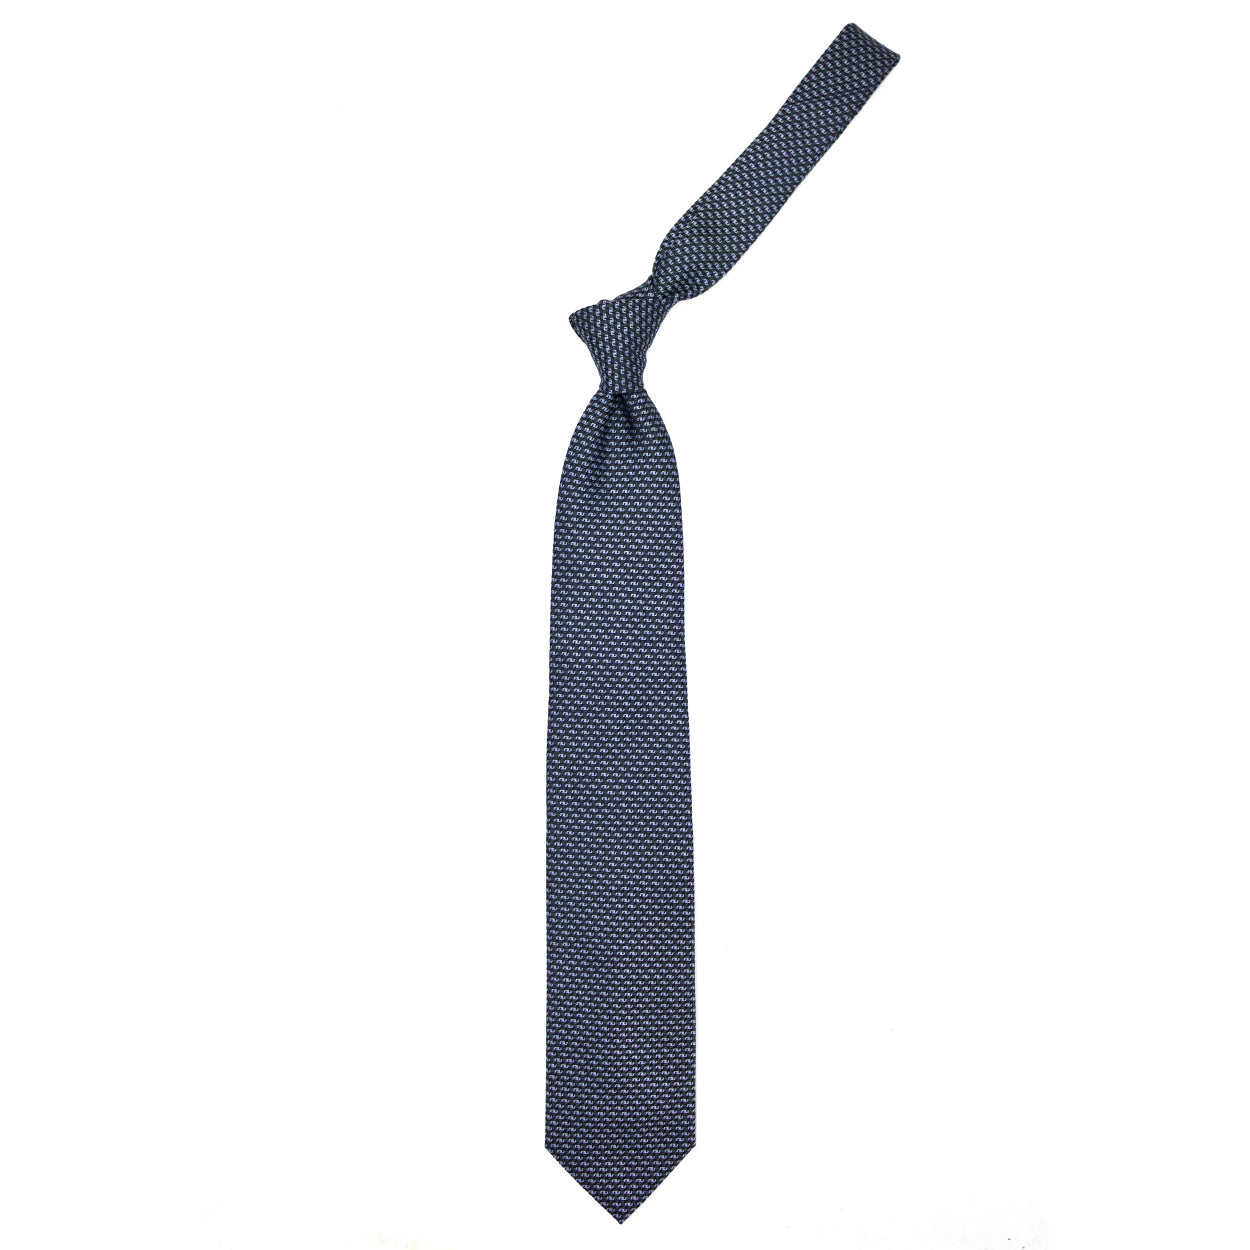 Grey and blue woven tie